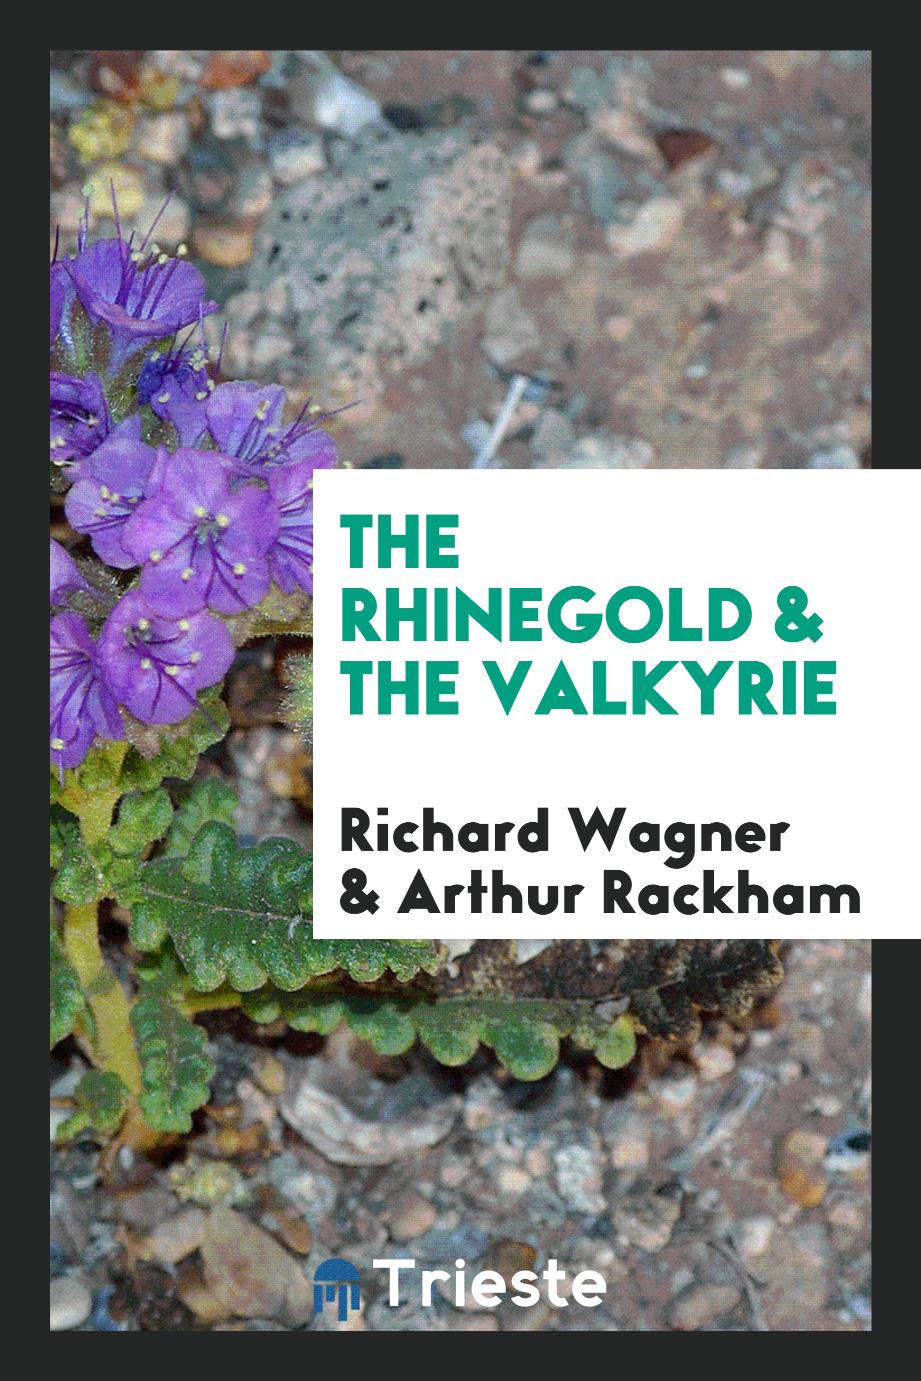 The Rhinegold & the Valkyrie